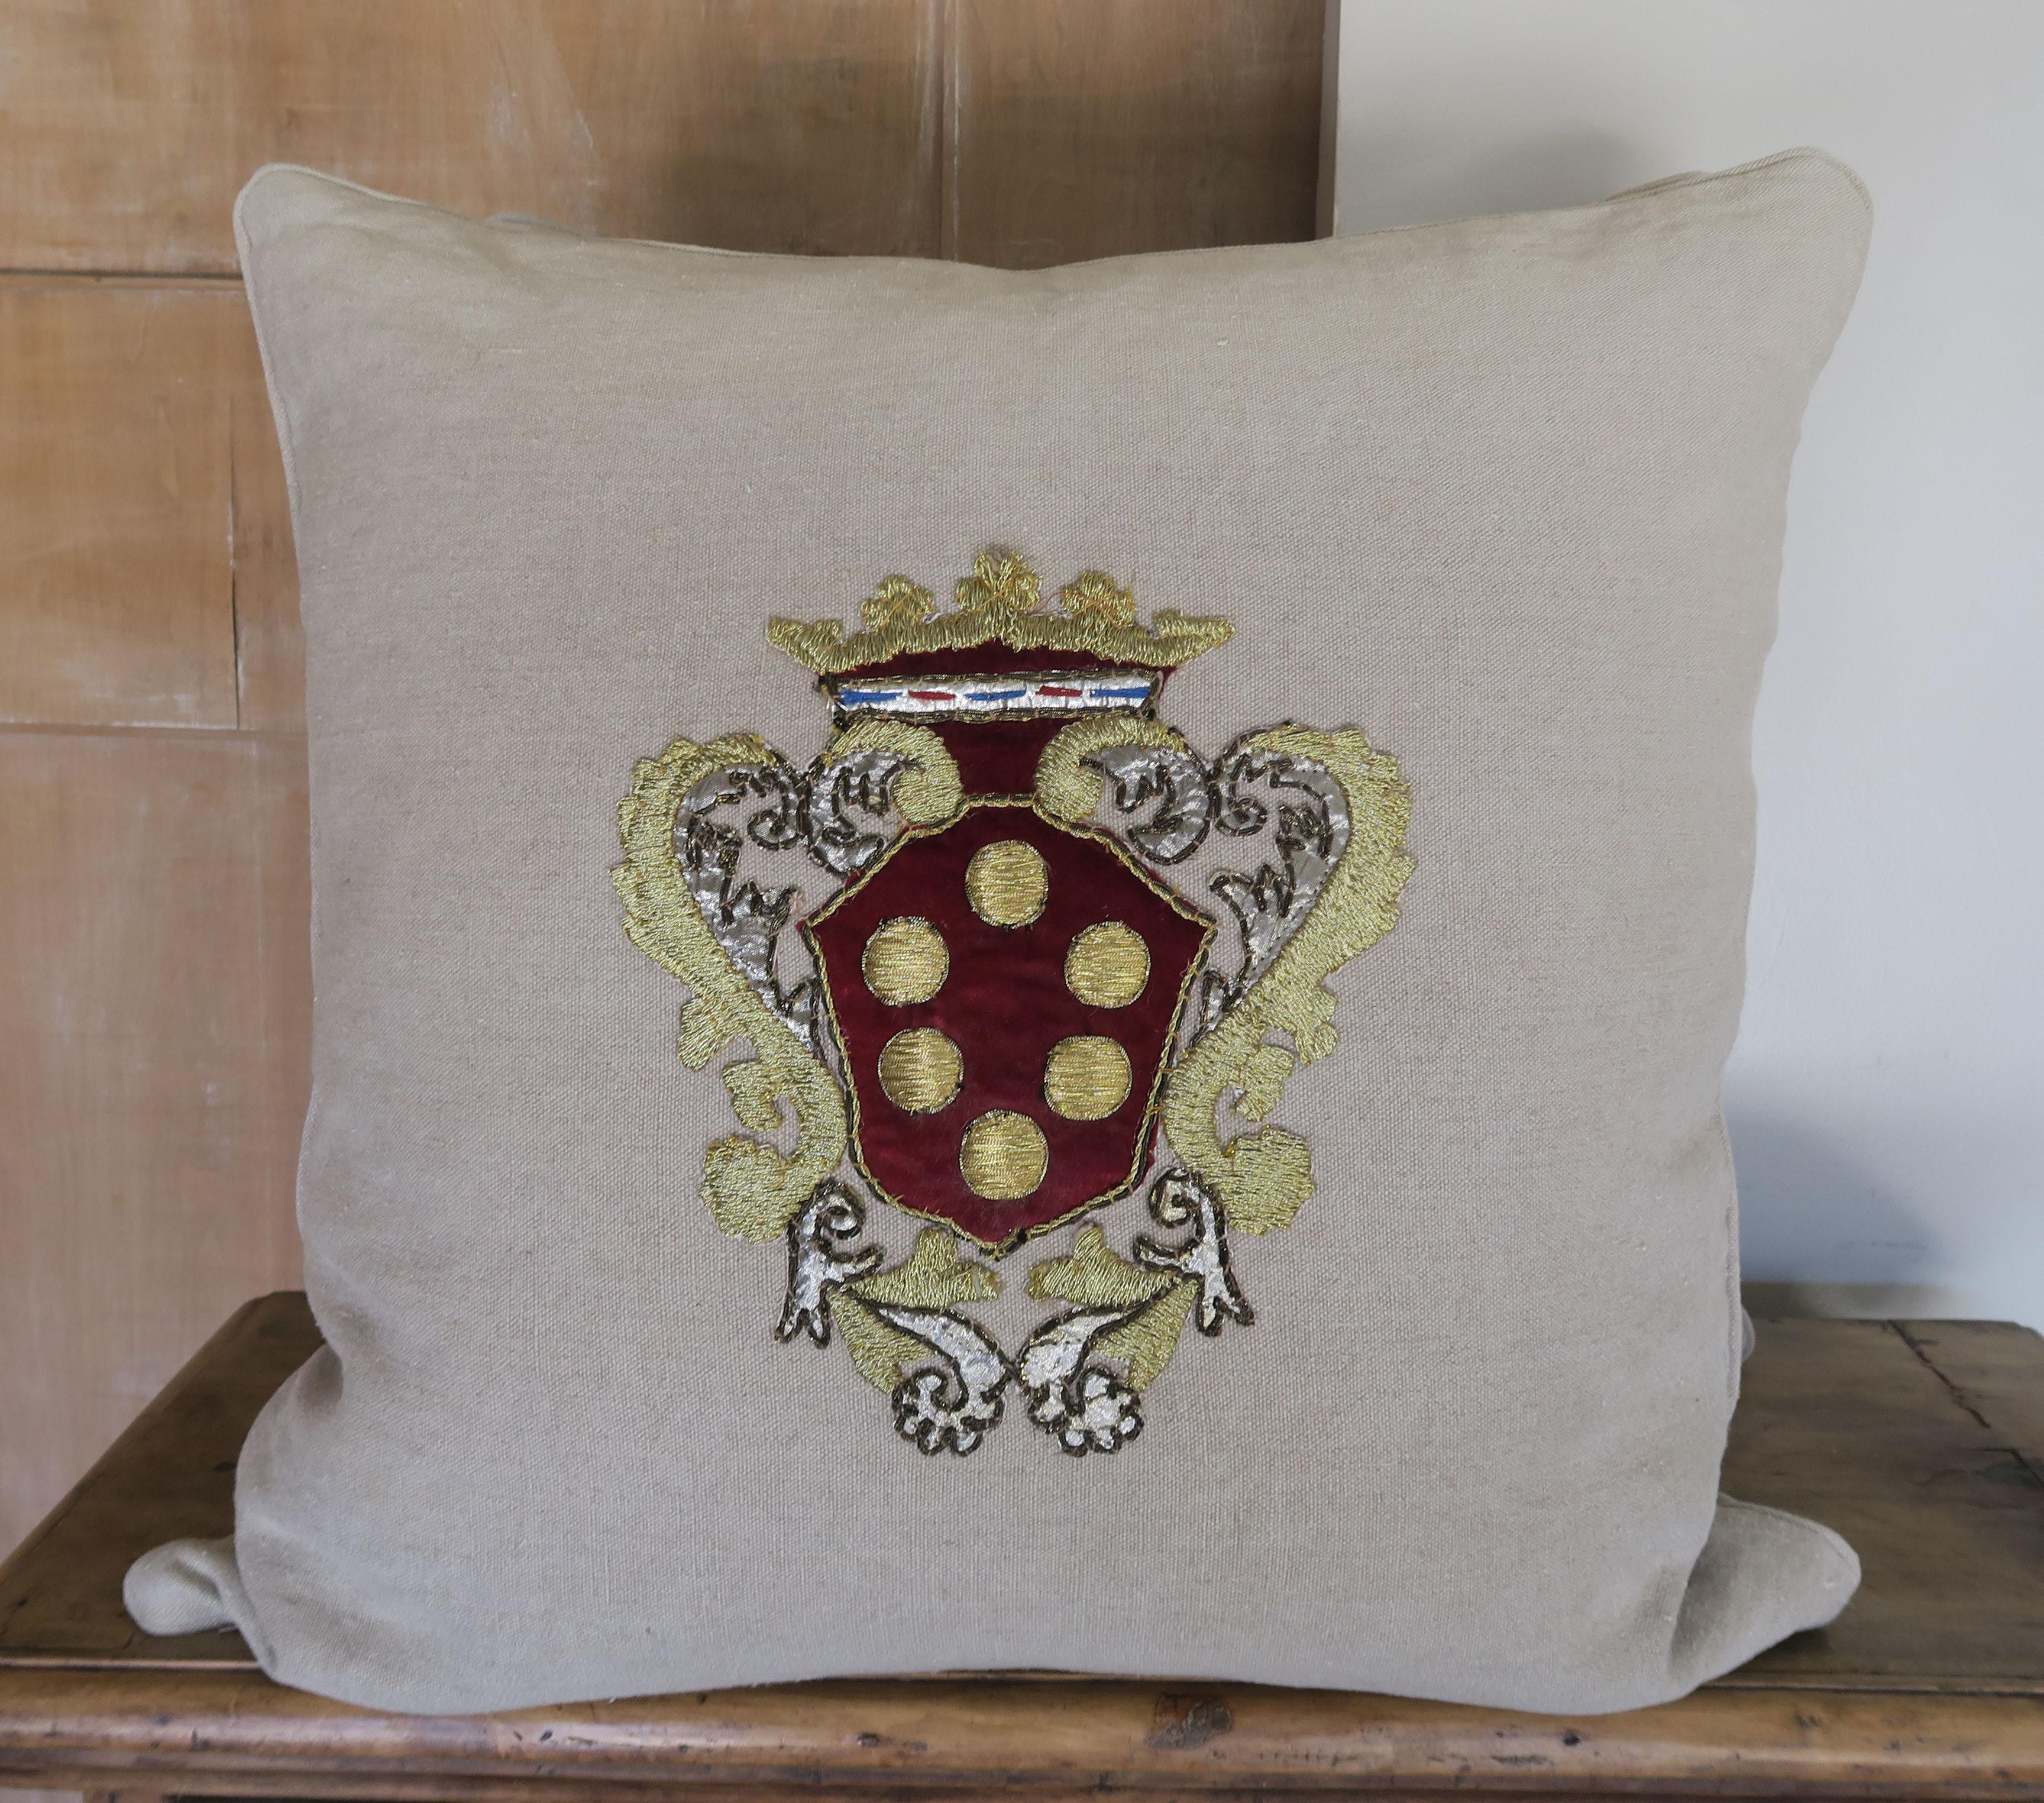 Custom pair of natural linen pillows with a metallic and velvet Italian shield appliqued on the fronts of both pillows. Down inserts, zipper closures.